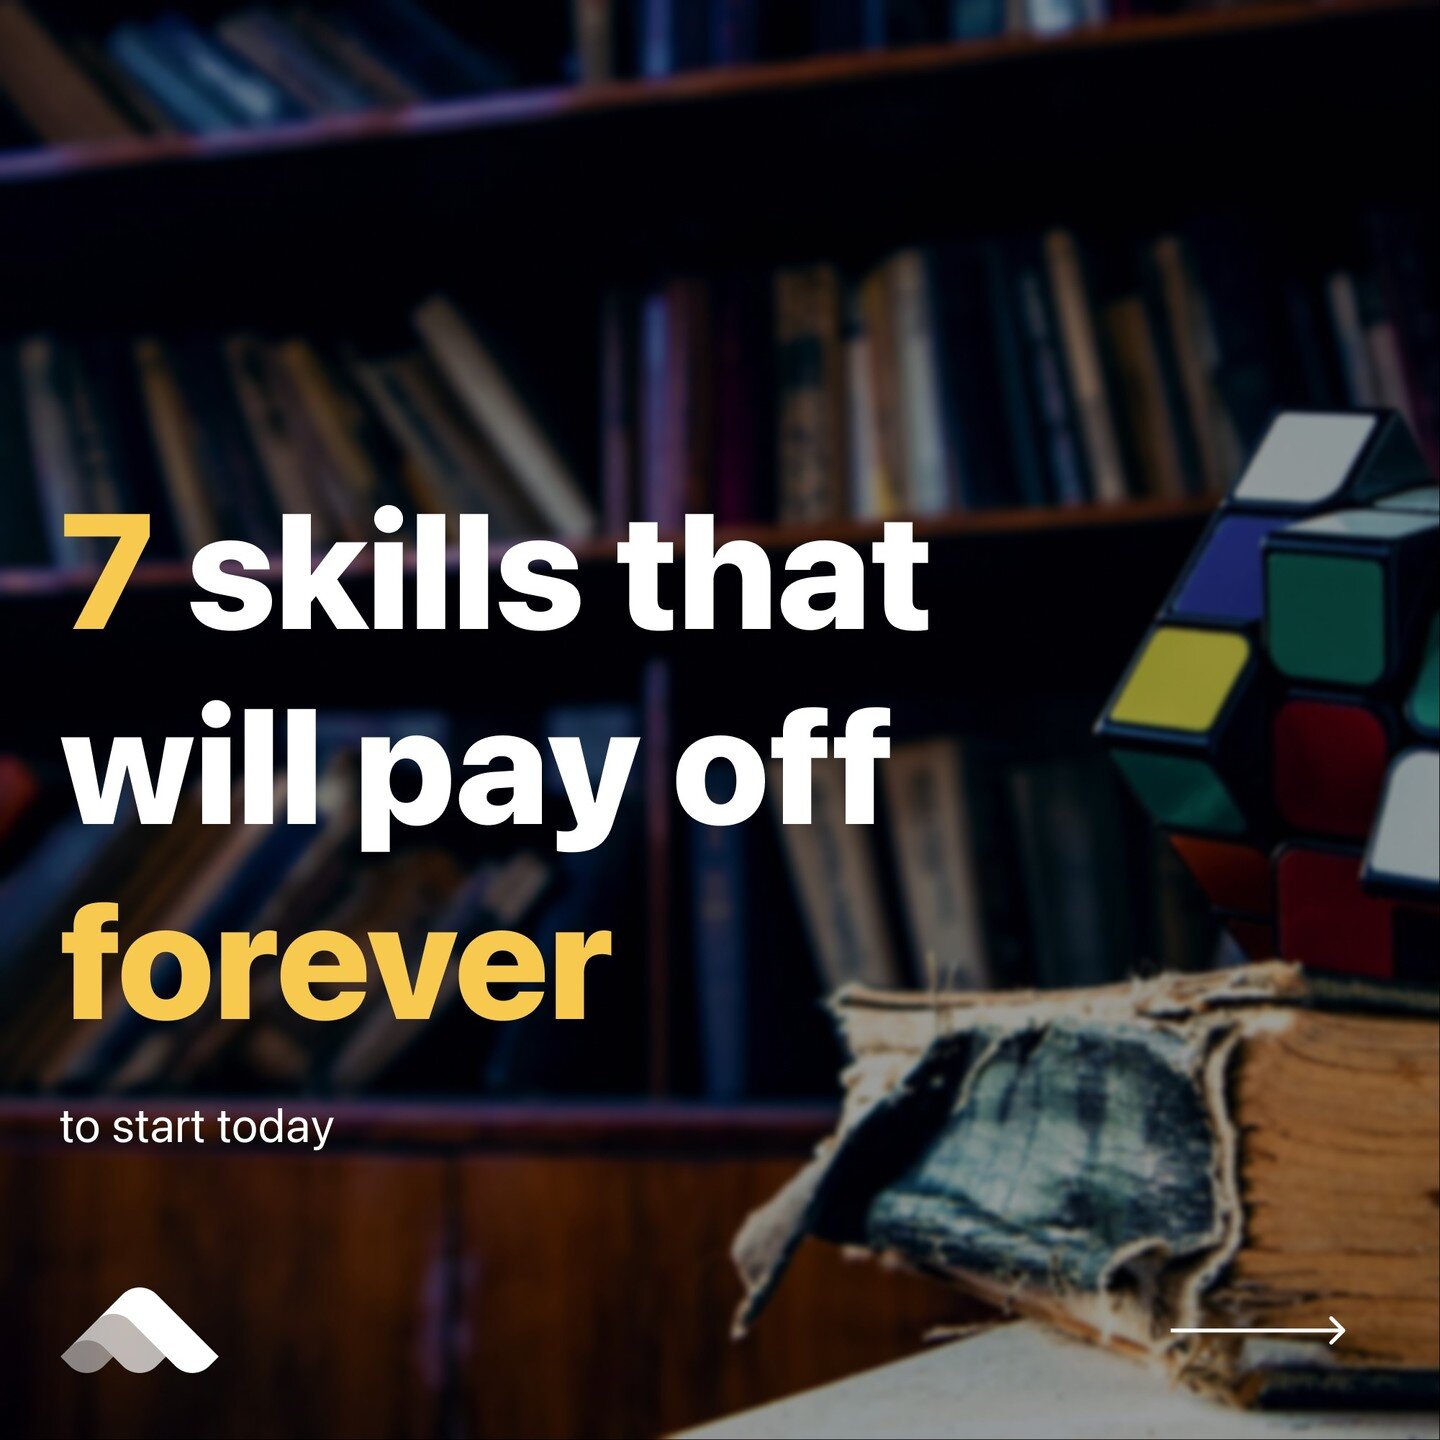 Learn and master these skills on ByDesign.io🚀
.
.
.
.
#productivity #positivevibes #goals #investing #speedreading #motivation